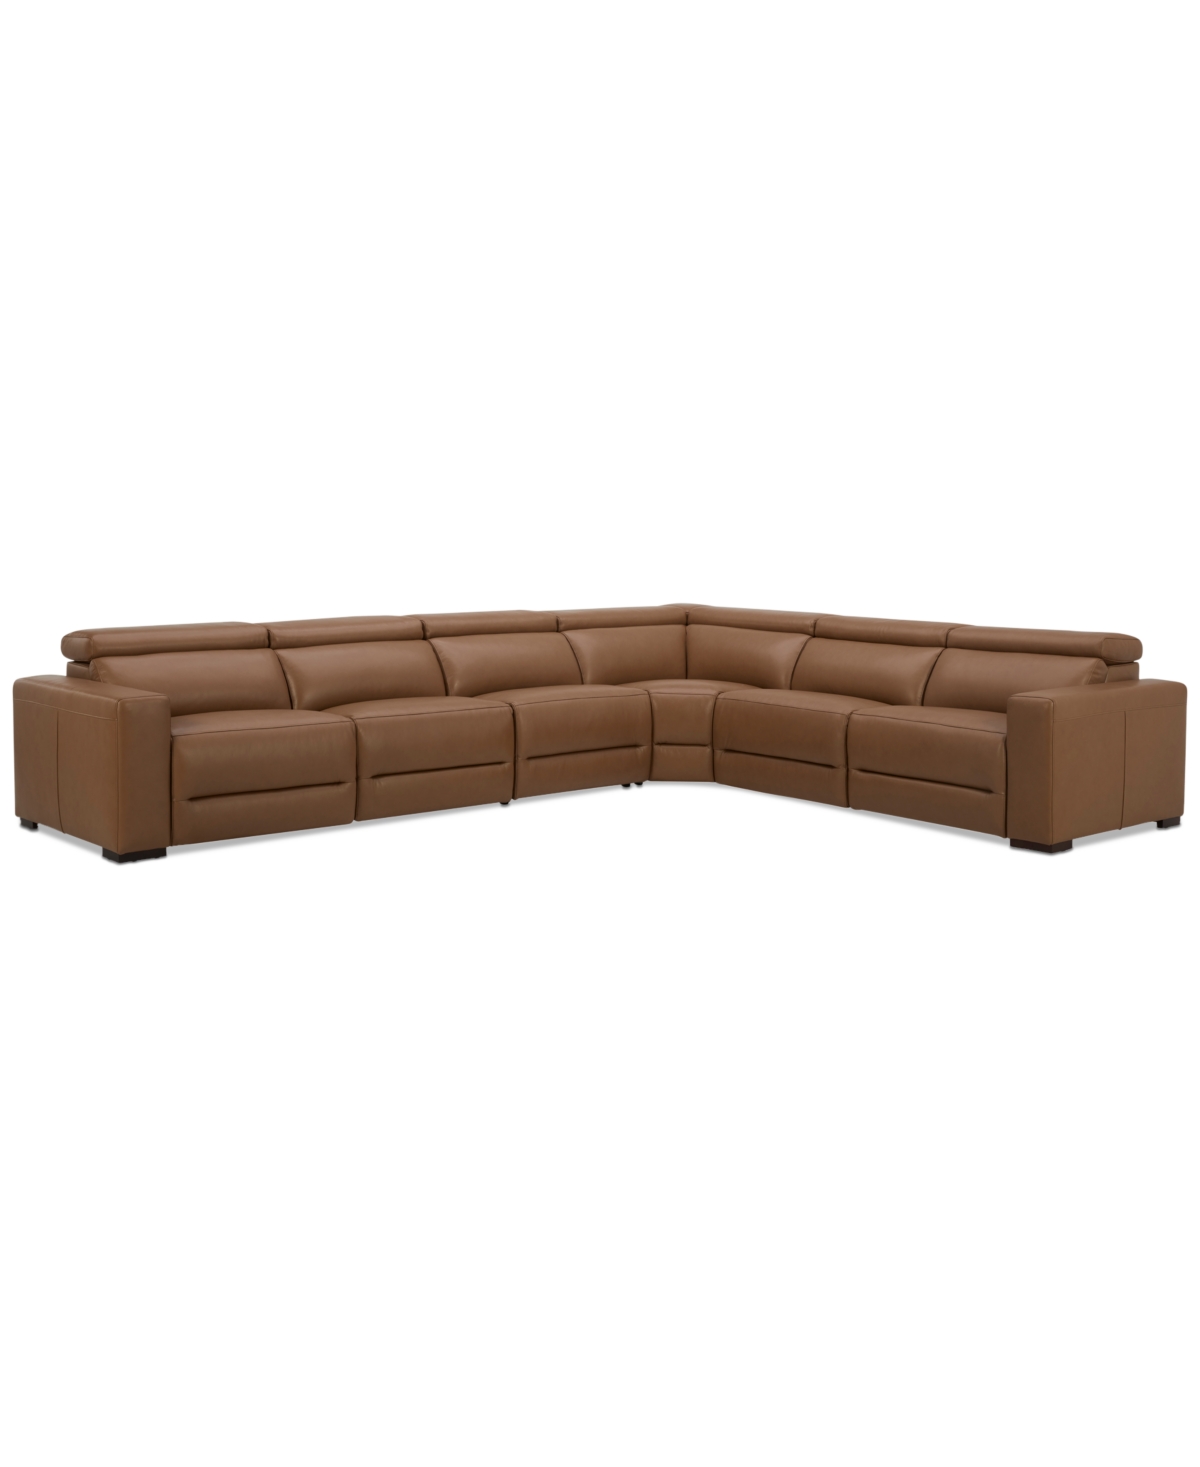 Macy's Nevio 157" 6-pc. Leather Sectional With 3 Power Recliners And Headrests, Created For  In Butternut